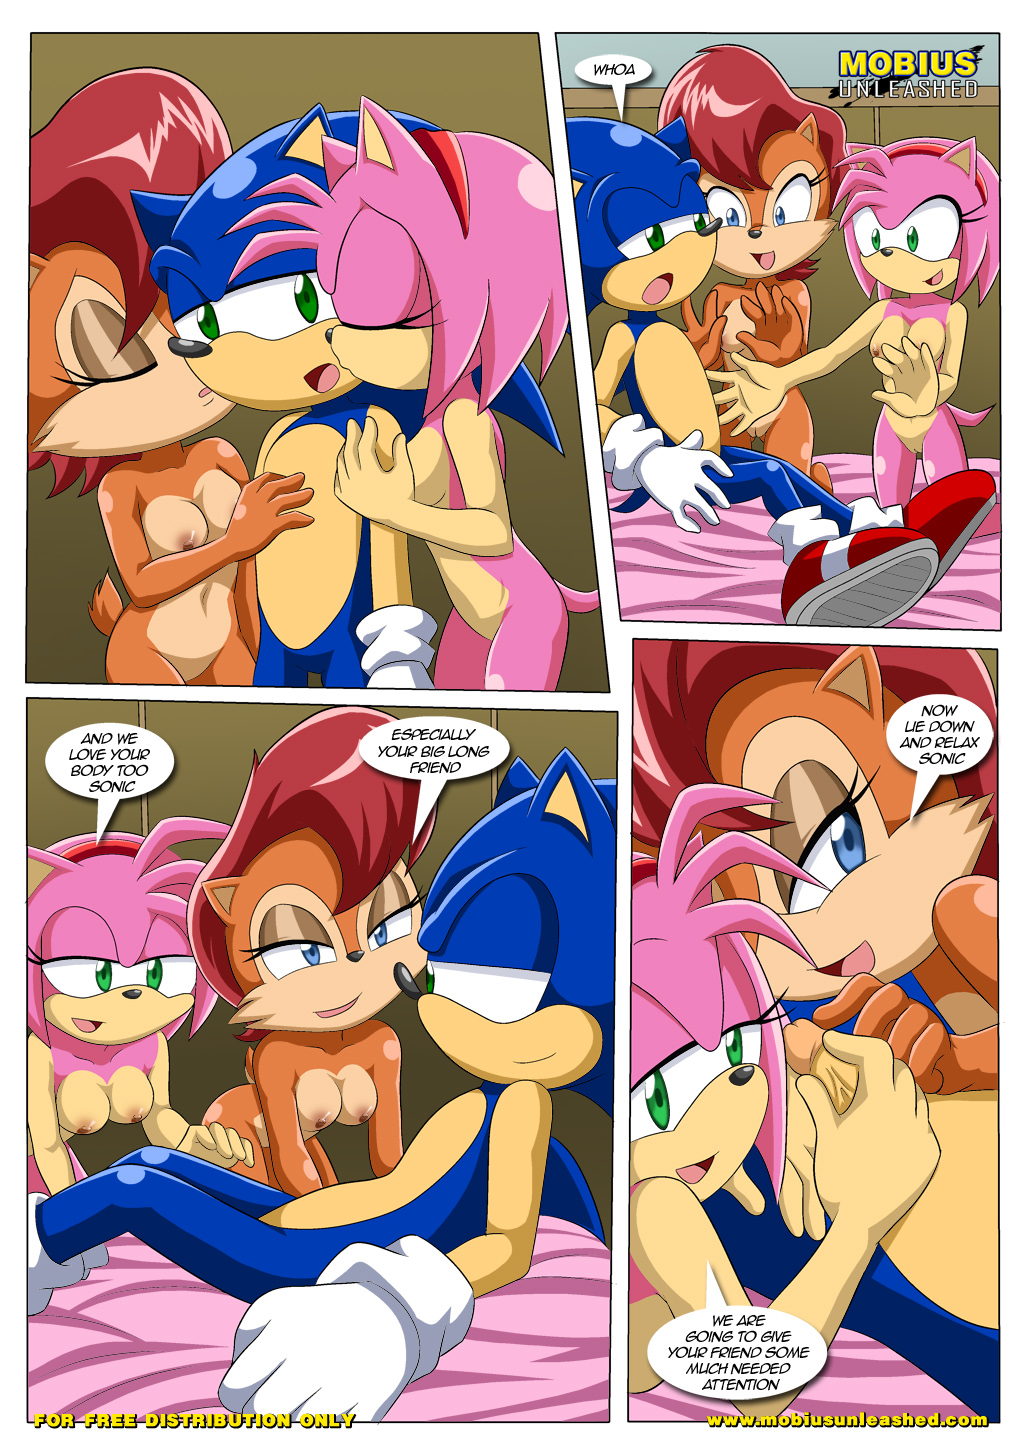 Amy Sally Acorn Porn - Something is. sonic porn mobius unleashed rouge